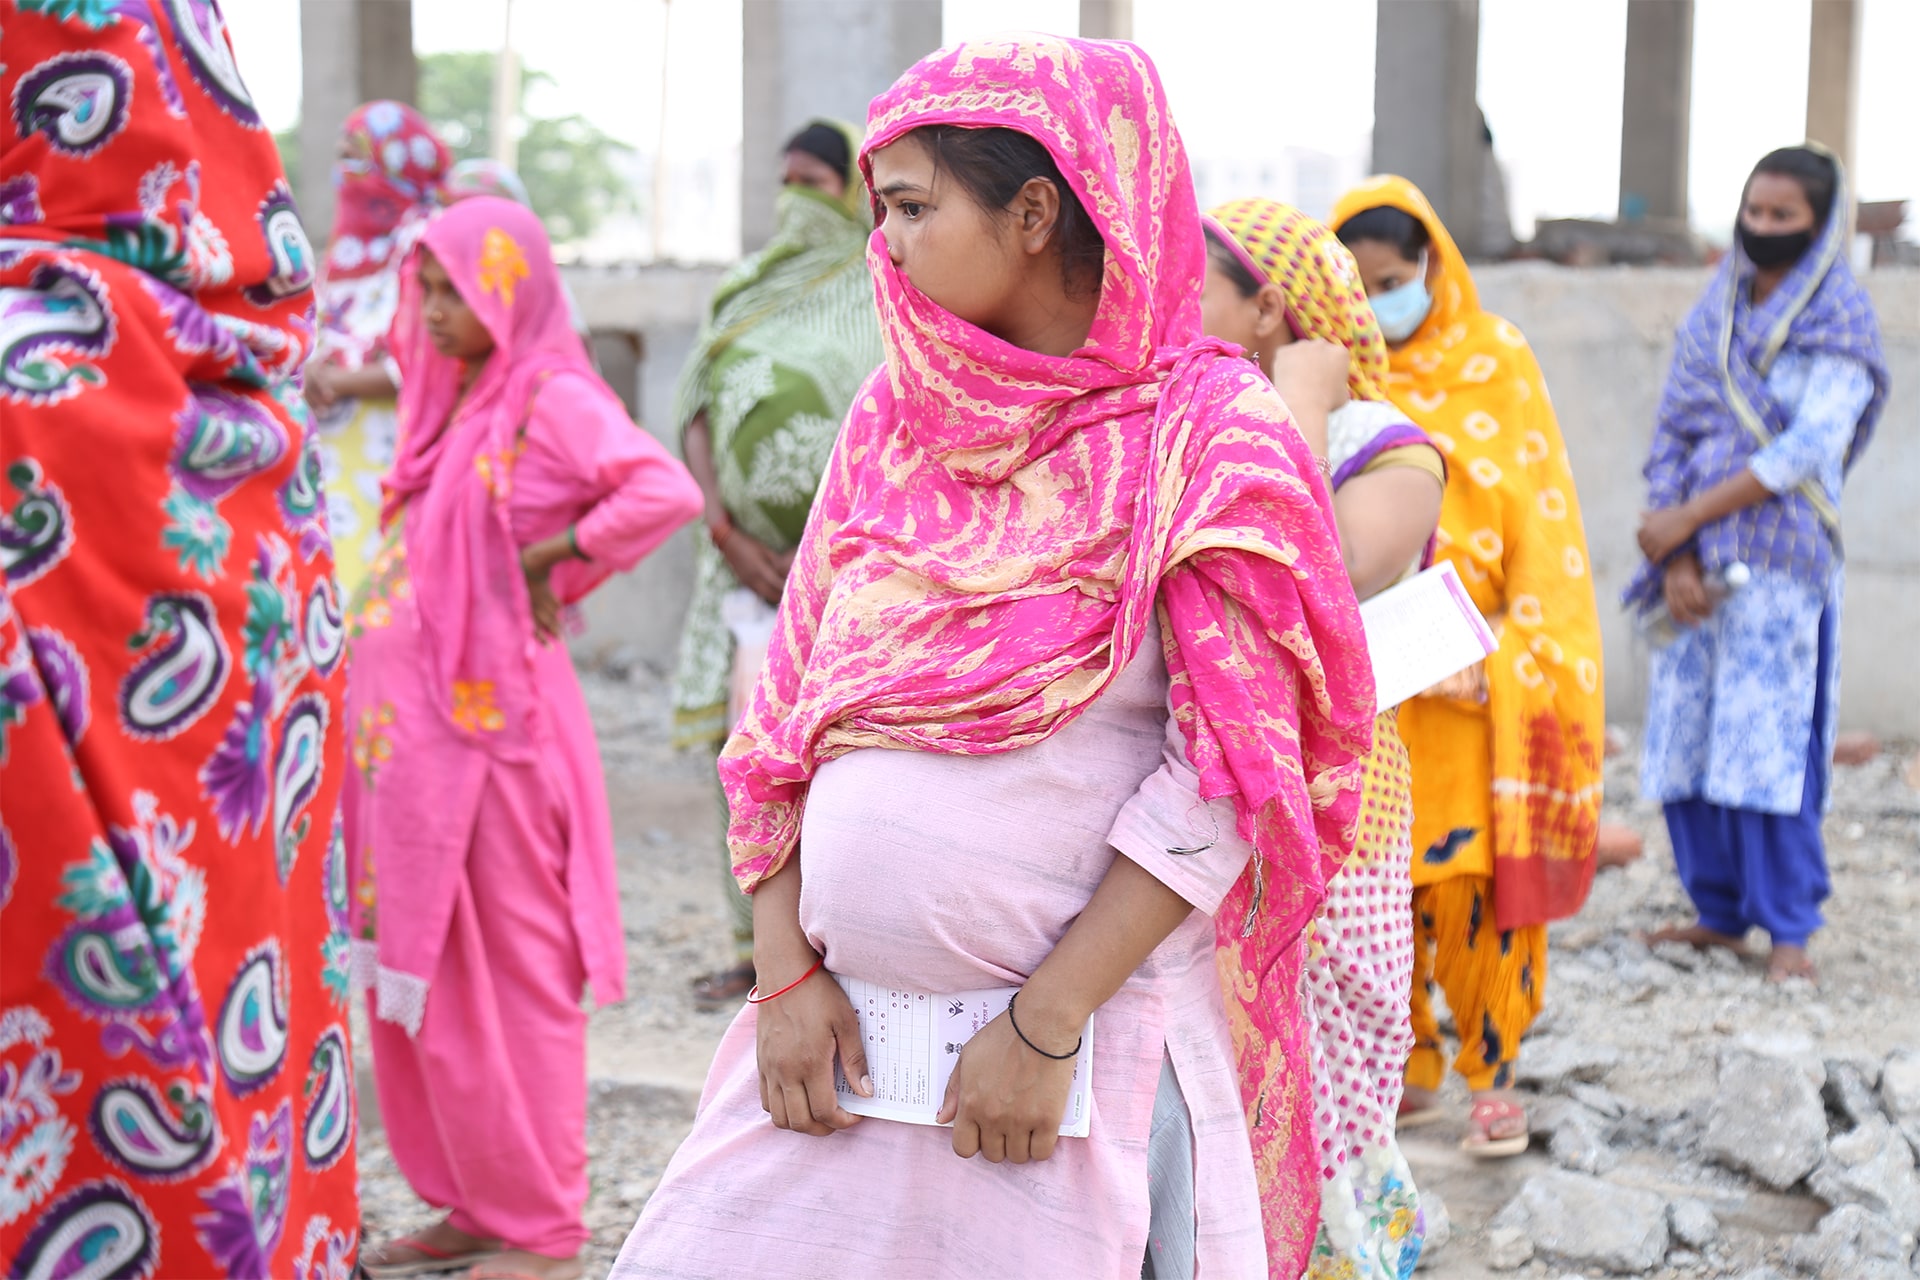 Support during Covid 19: Serving the underprivileged Pregnant women